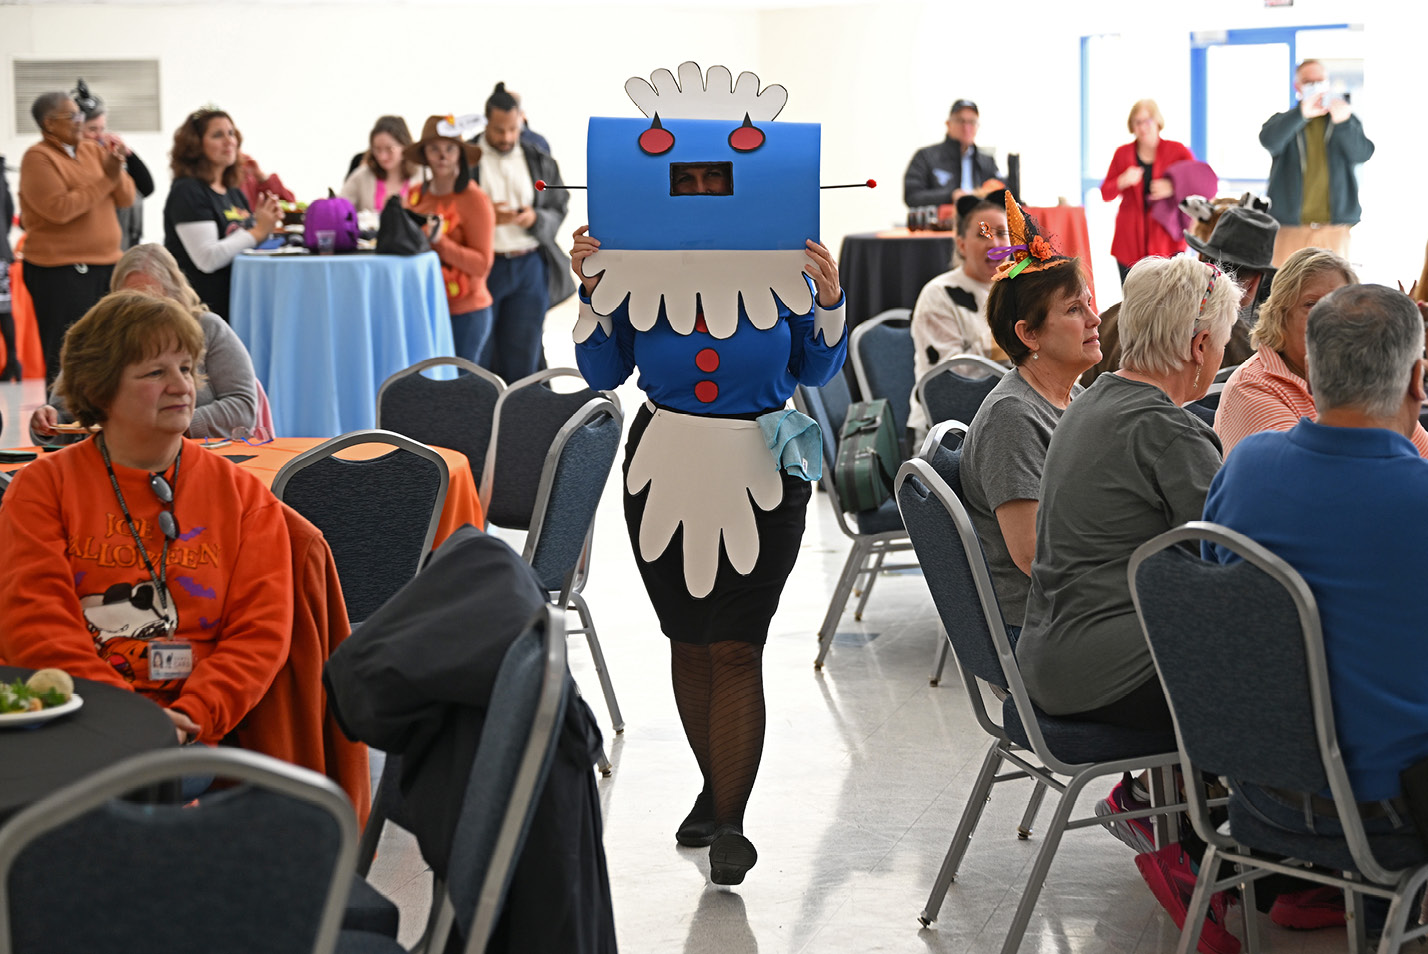 Rosie the Robot took top honors at the annual Staff Council Halloween Party in the 1962 Room.